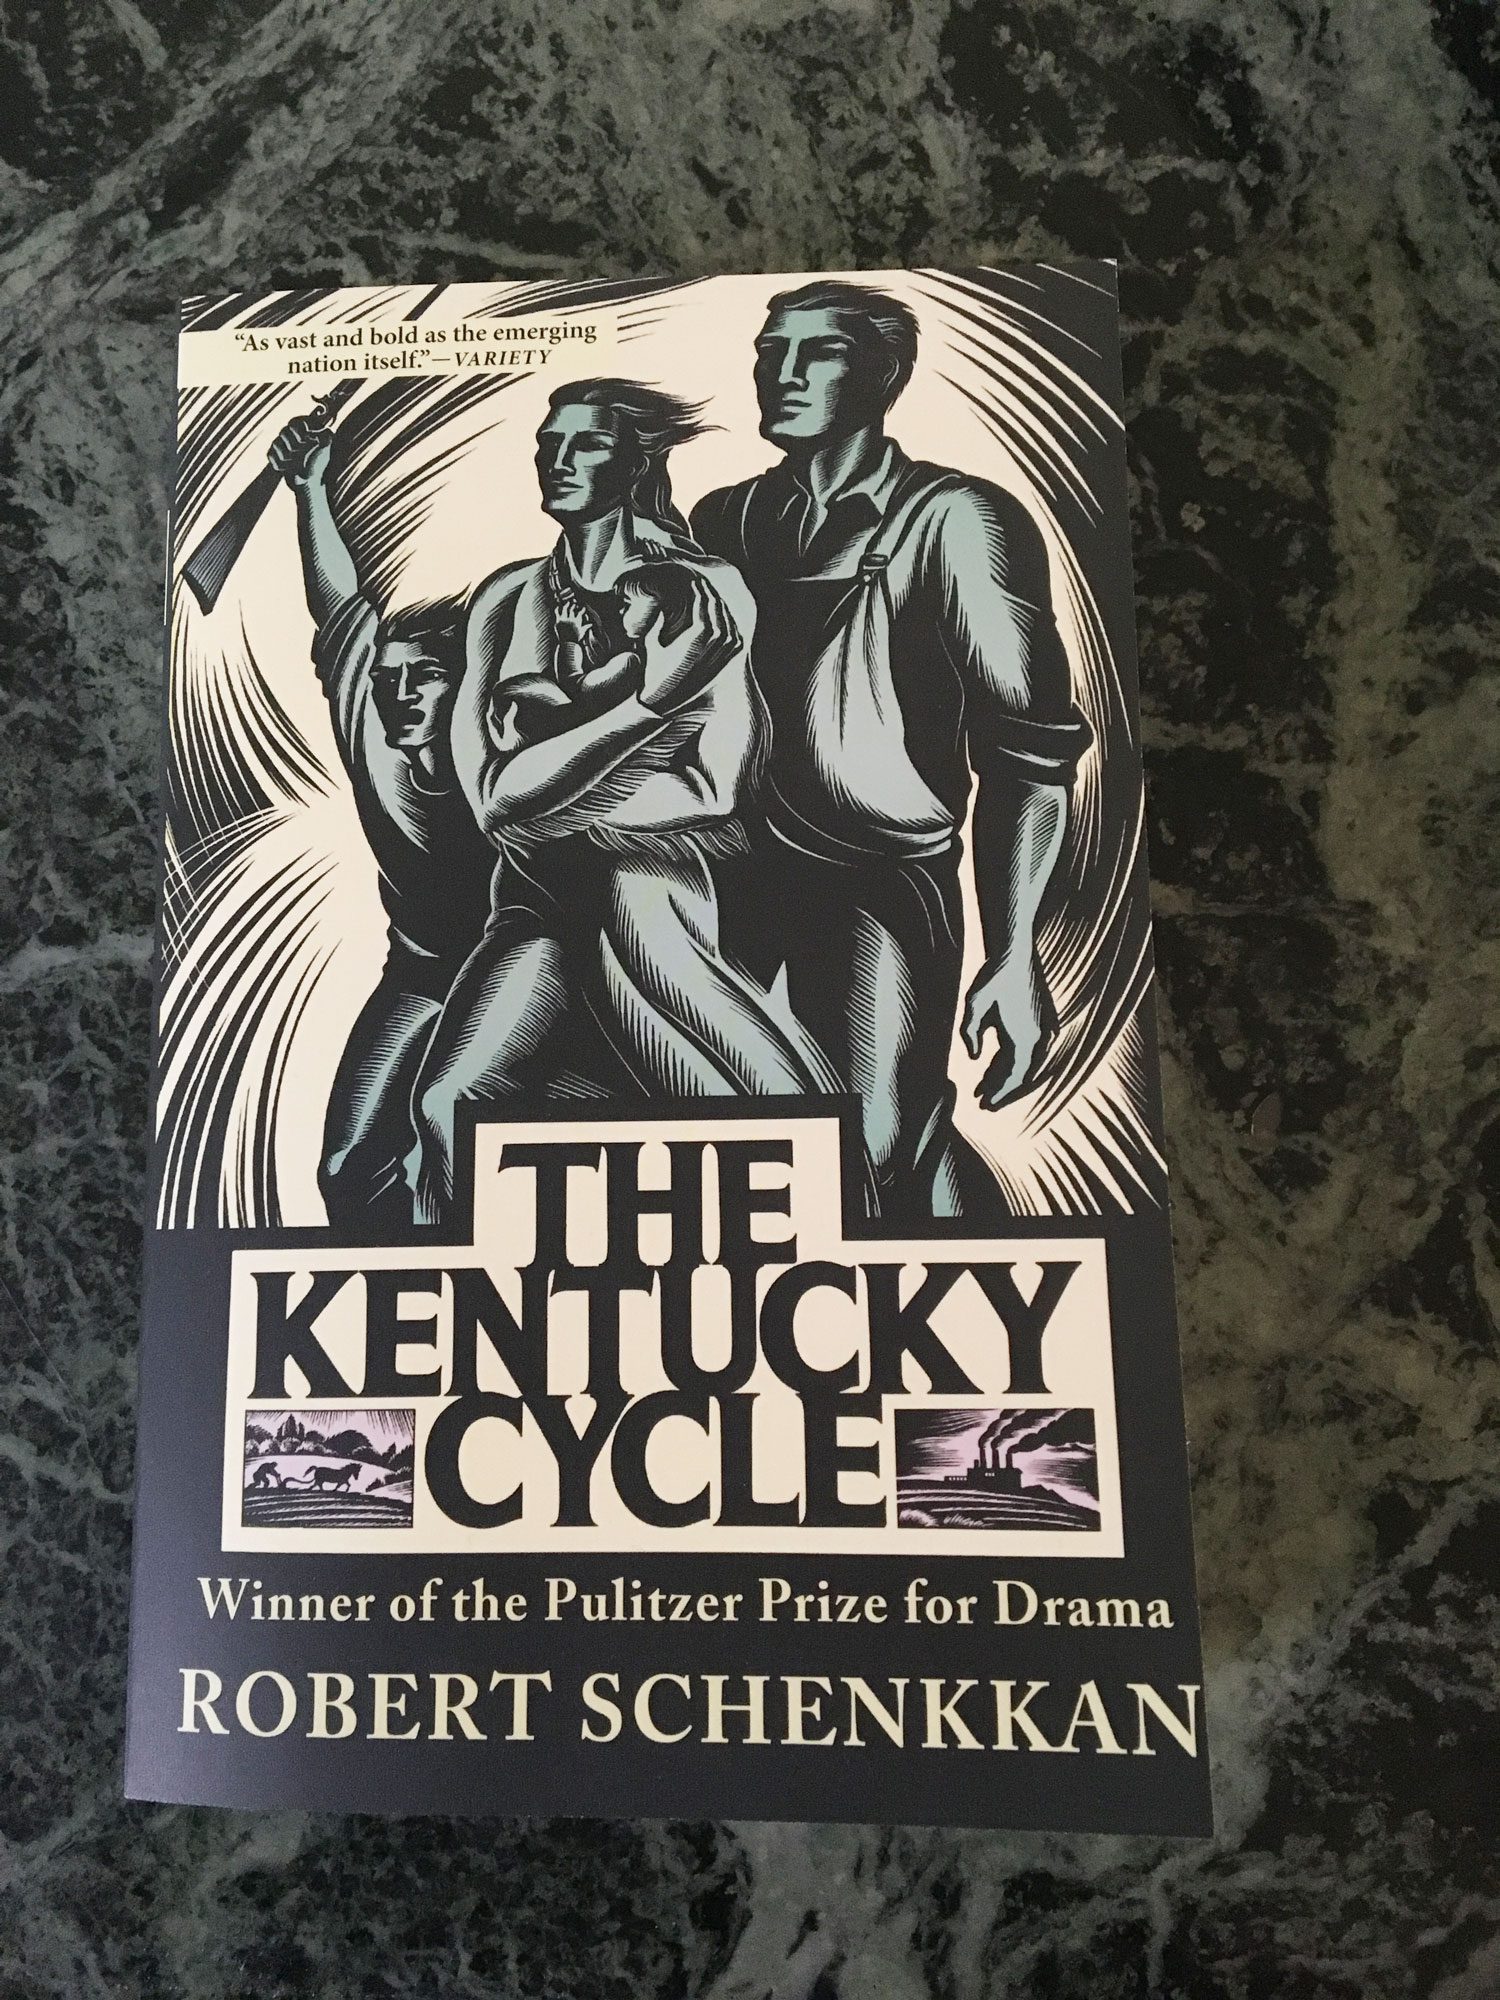 New Reissue of THE KENTUCKY CYCLE!